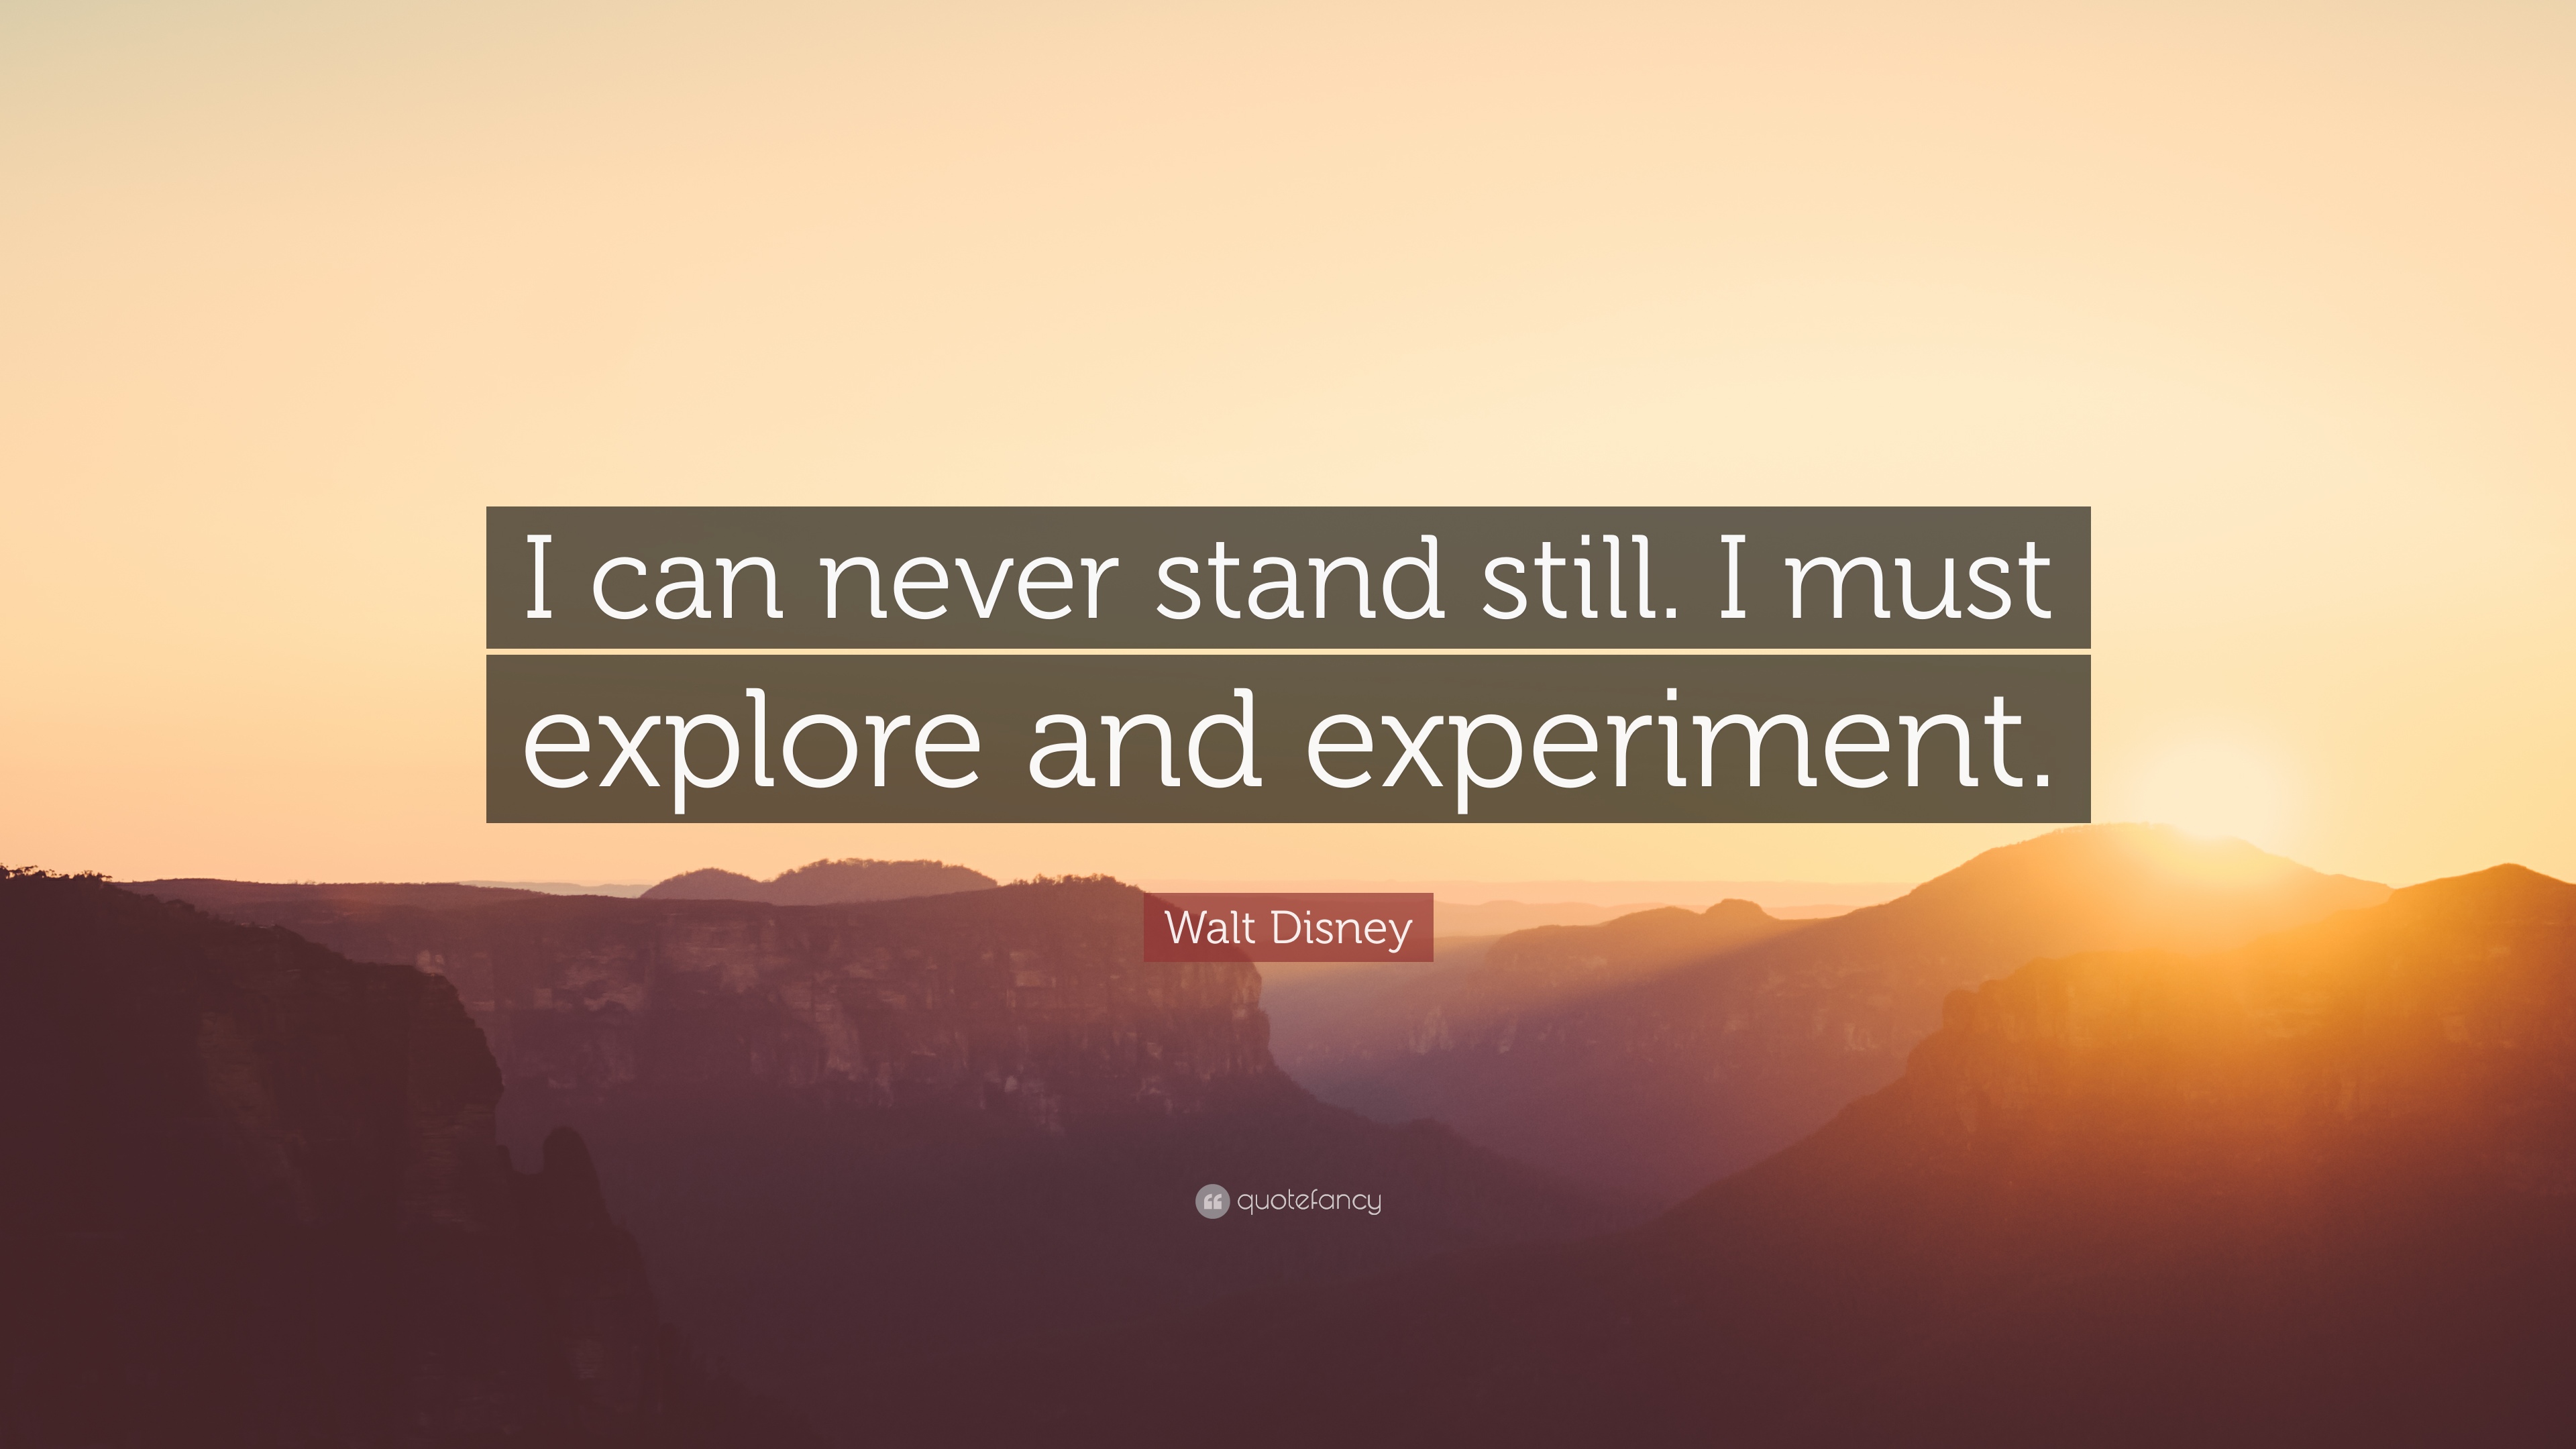 Walt Disney Quote: “I can never stand still. I must explore and ...